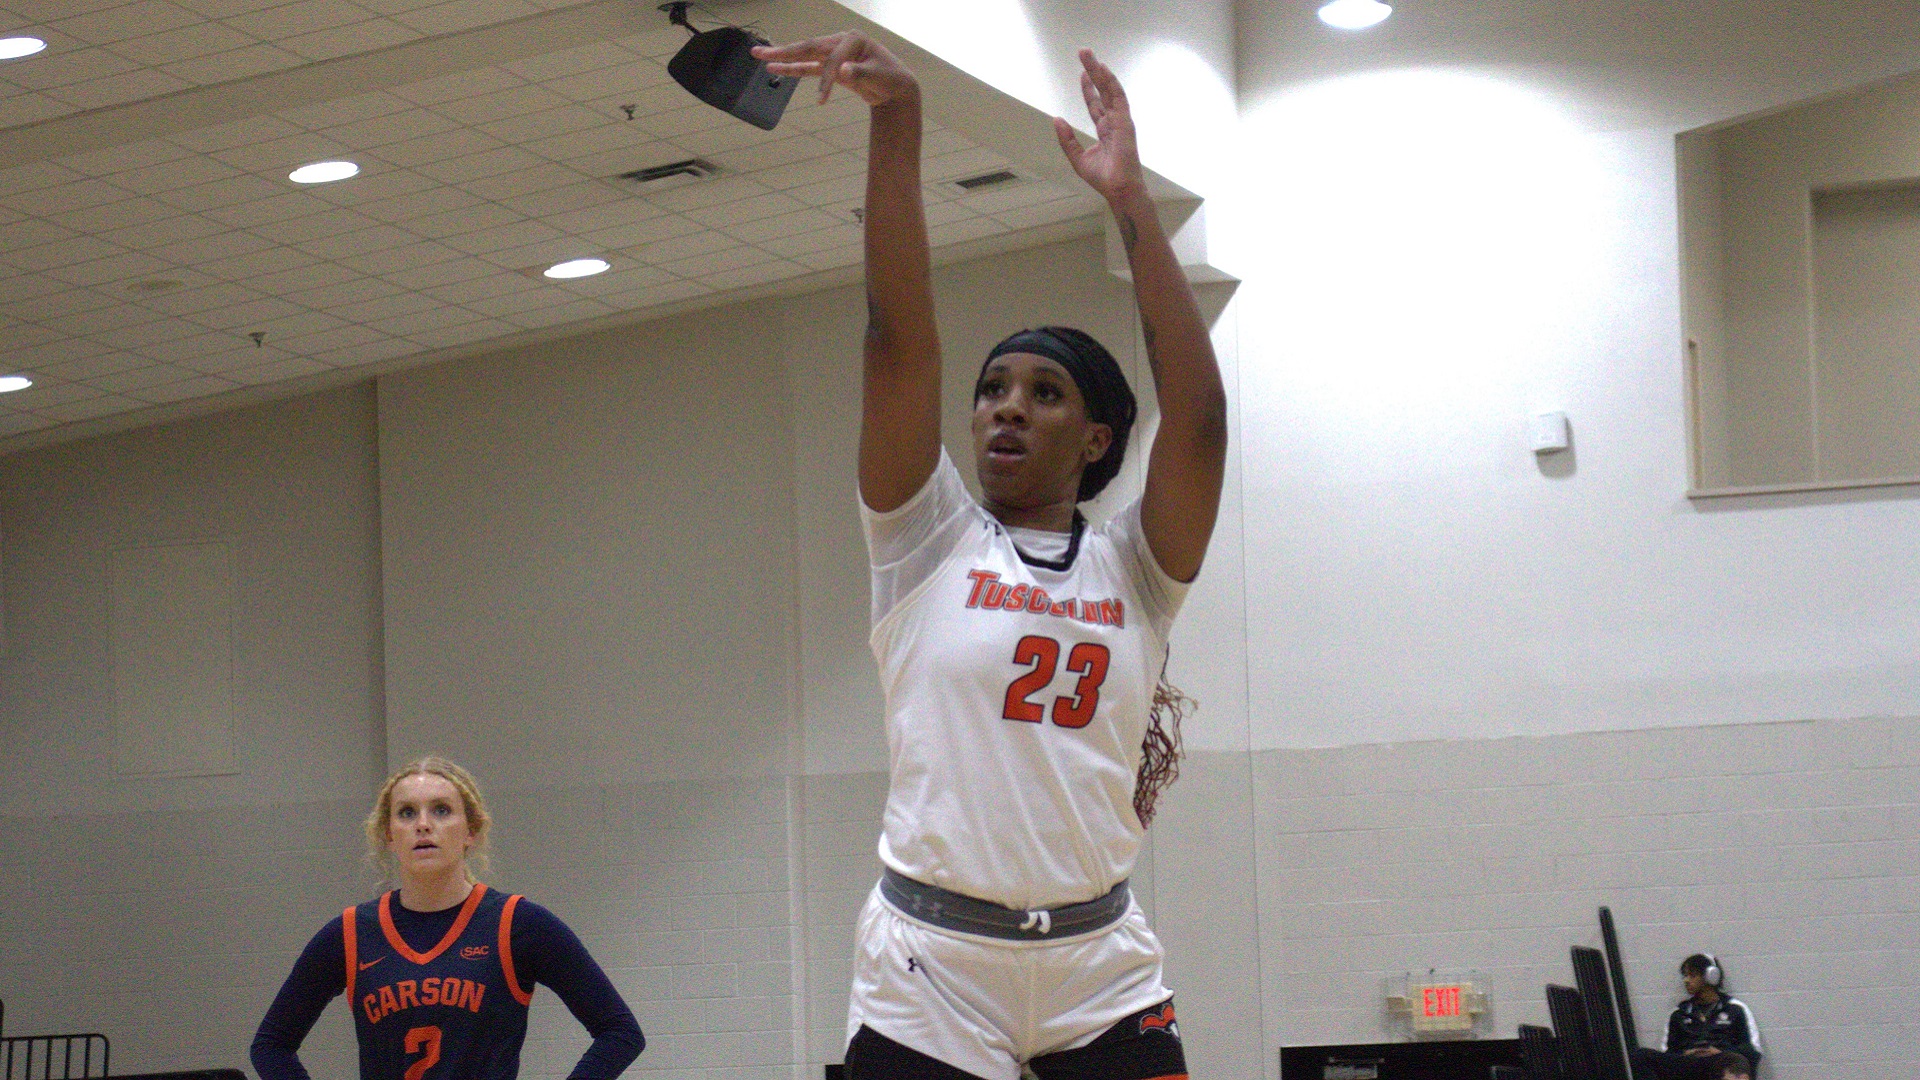 Nae Marion scored 11 points and had nine rebounds in her season debut against Carson-Newman